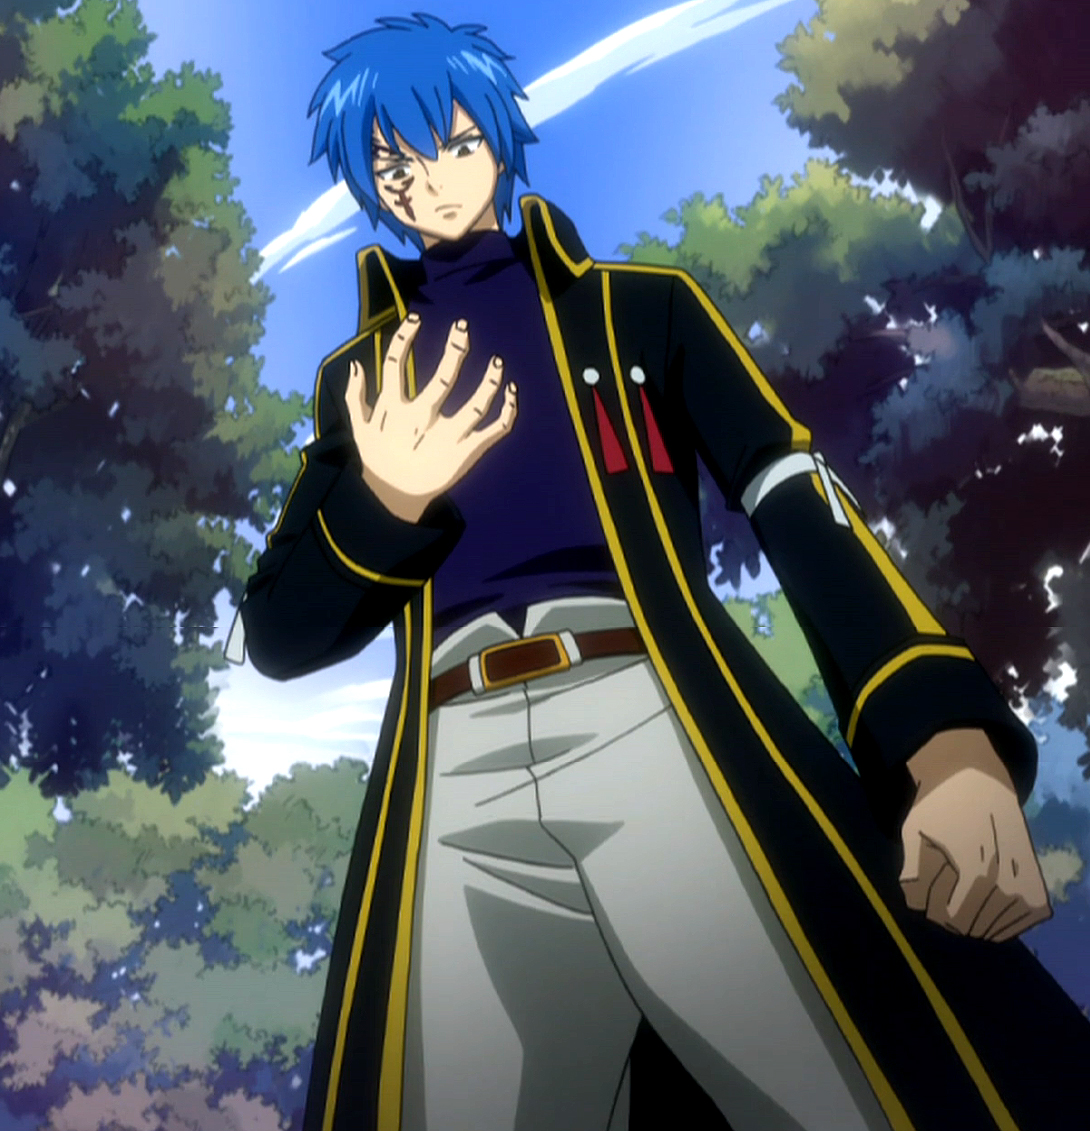 Fairy Tail: Jellal Fernandes - Photo Colection